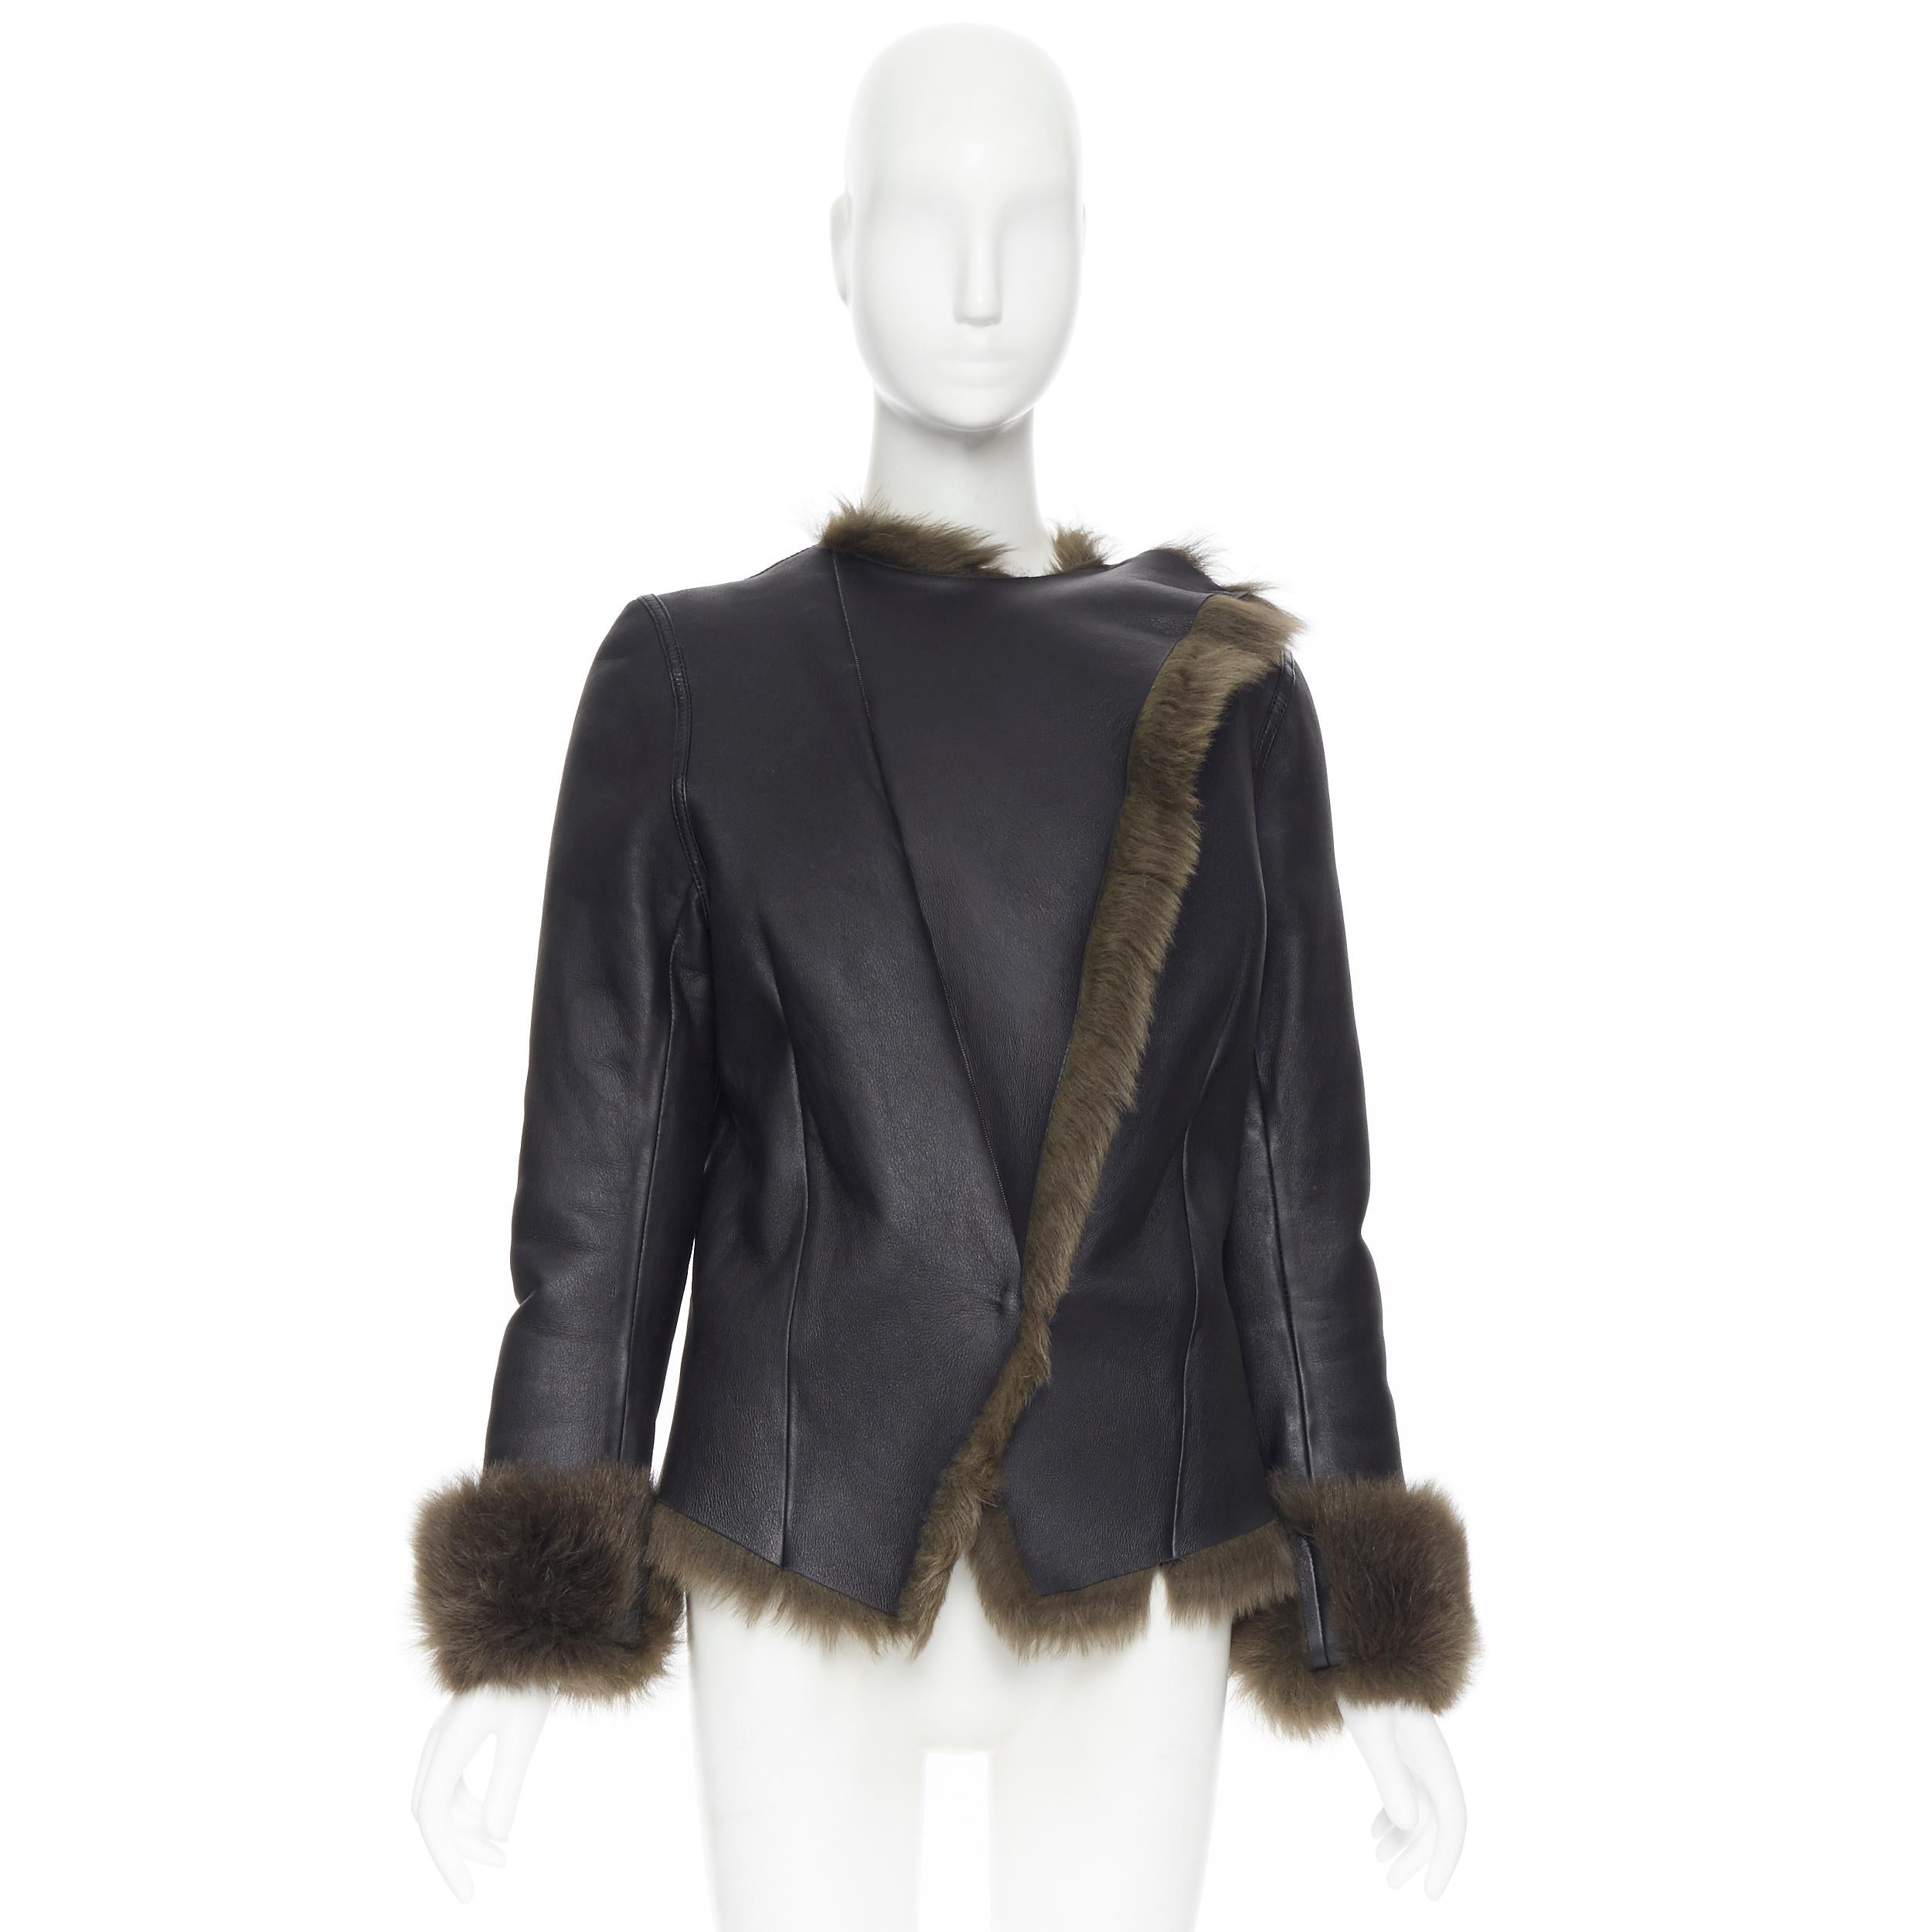 BALENCIAGA 2012 black leather green fur lined moto winter jacket FR40 M 
Reference: CC/AECG00331 
Brand: Balenciaga 
Collection: 2012 
Material: Leather 
Color: Black 
Pattern: Solid 
Closure: Hook & Eye 
Extra Detail: Fully lined in fur. 
Made in: